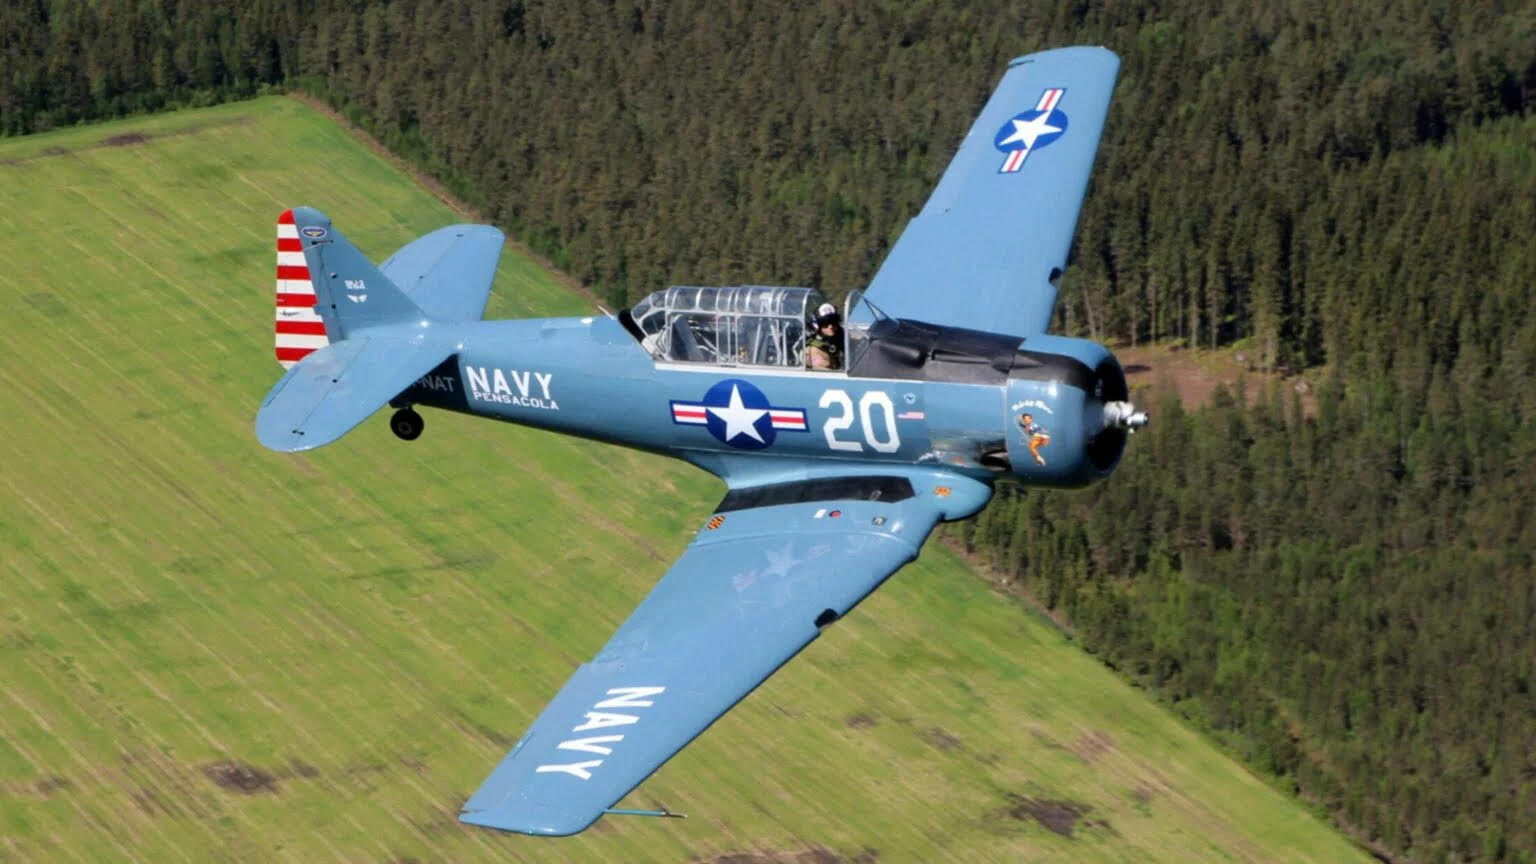 1942 North American SNJ 3 T6 Texan Harvard Military Aircraft For Sale